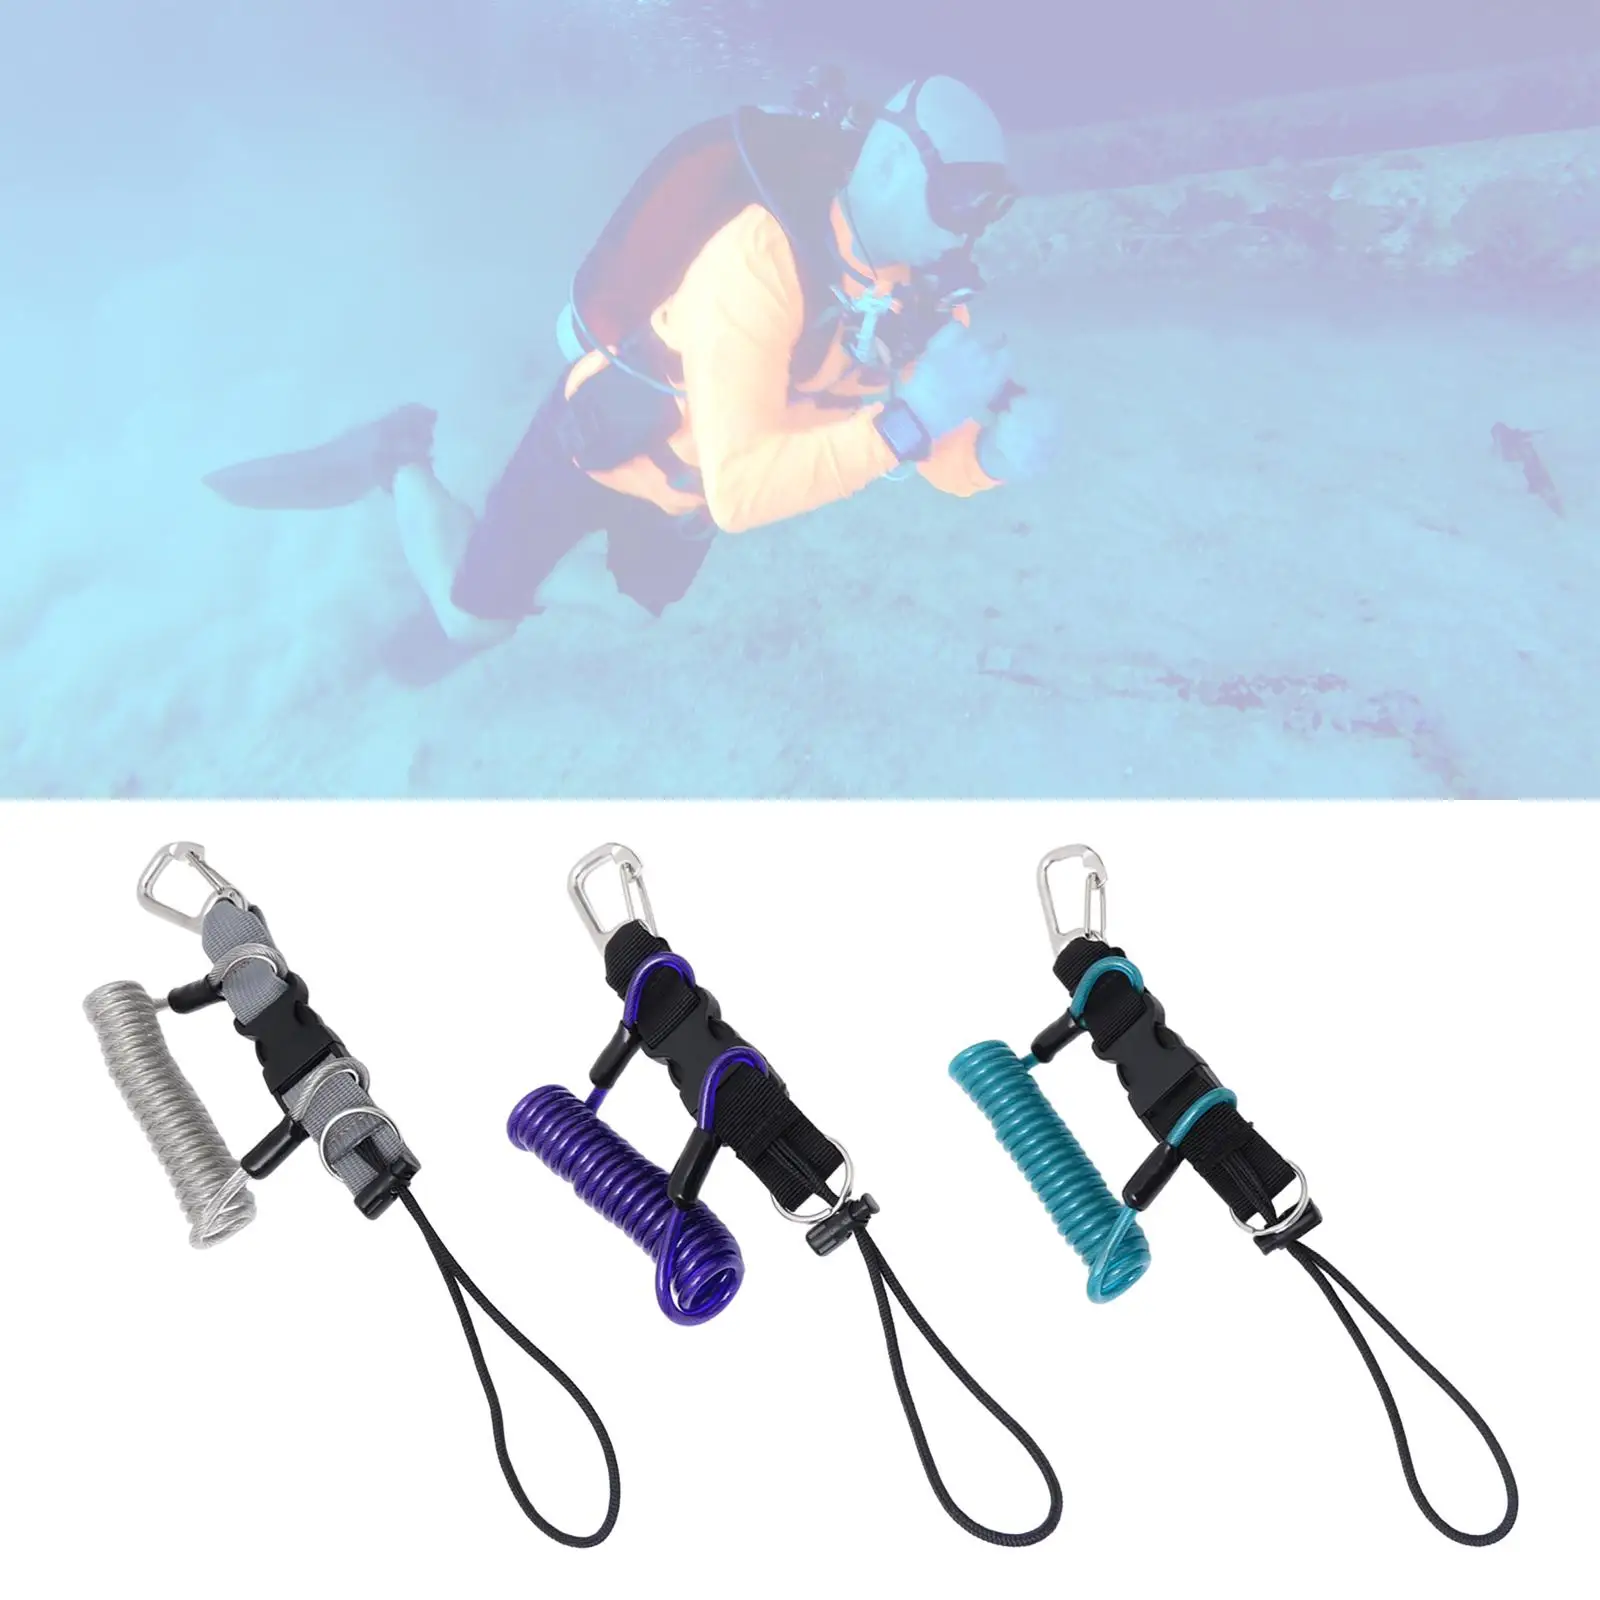 Scuba Diving Lanyard Wristband Safety Rope with Hook Professional Freediving Rope Lanyard for Underwater Tools Lights Paddles